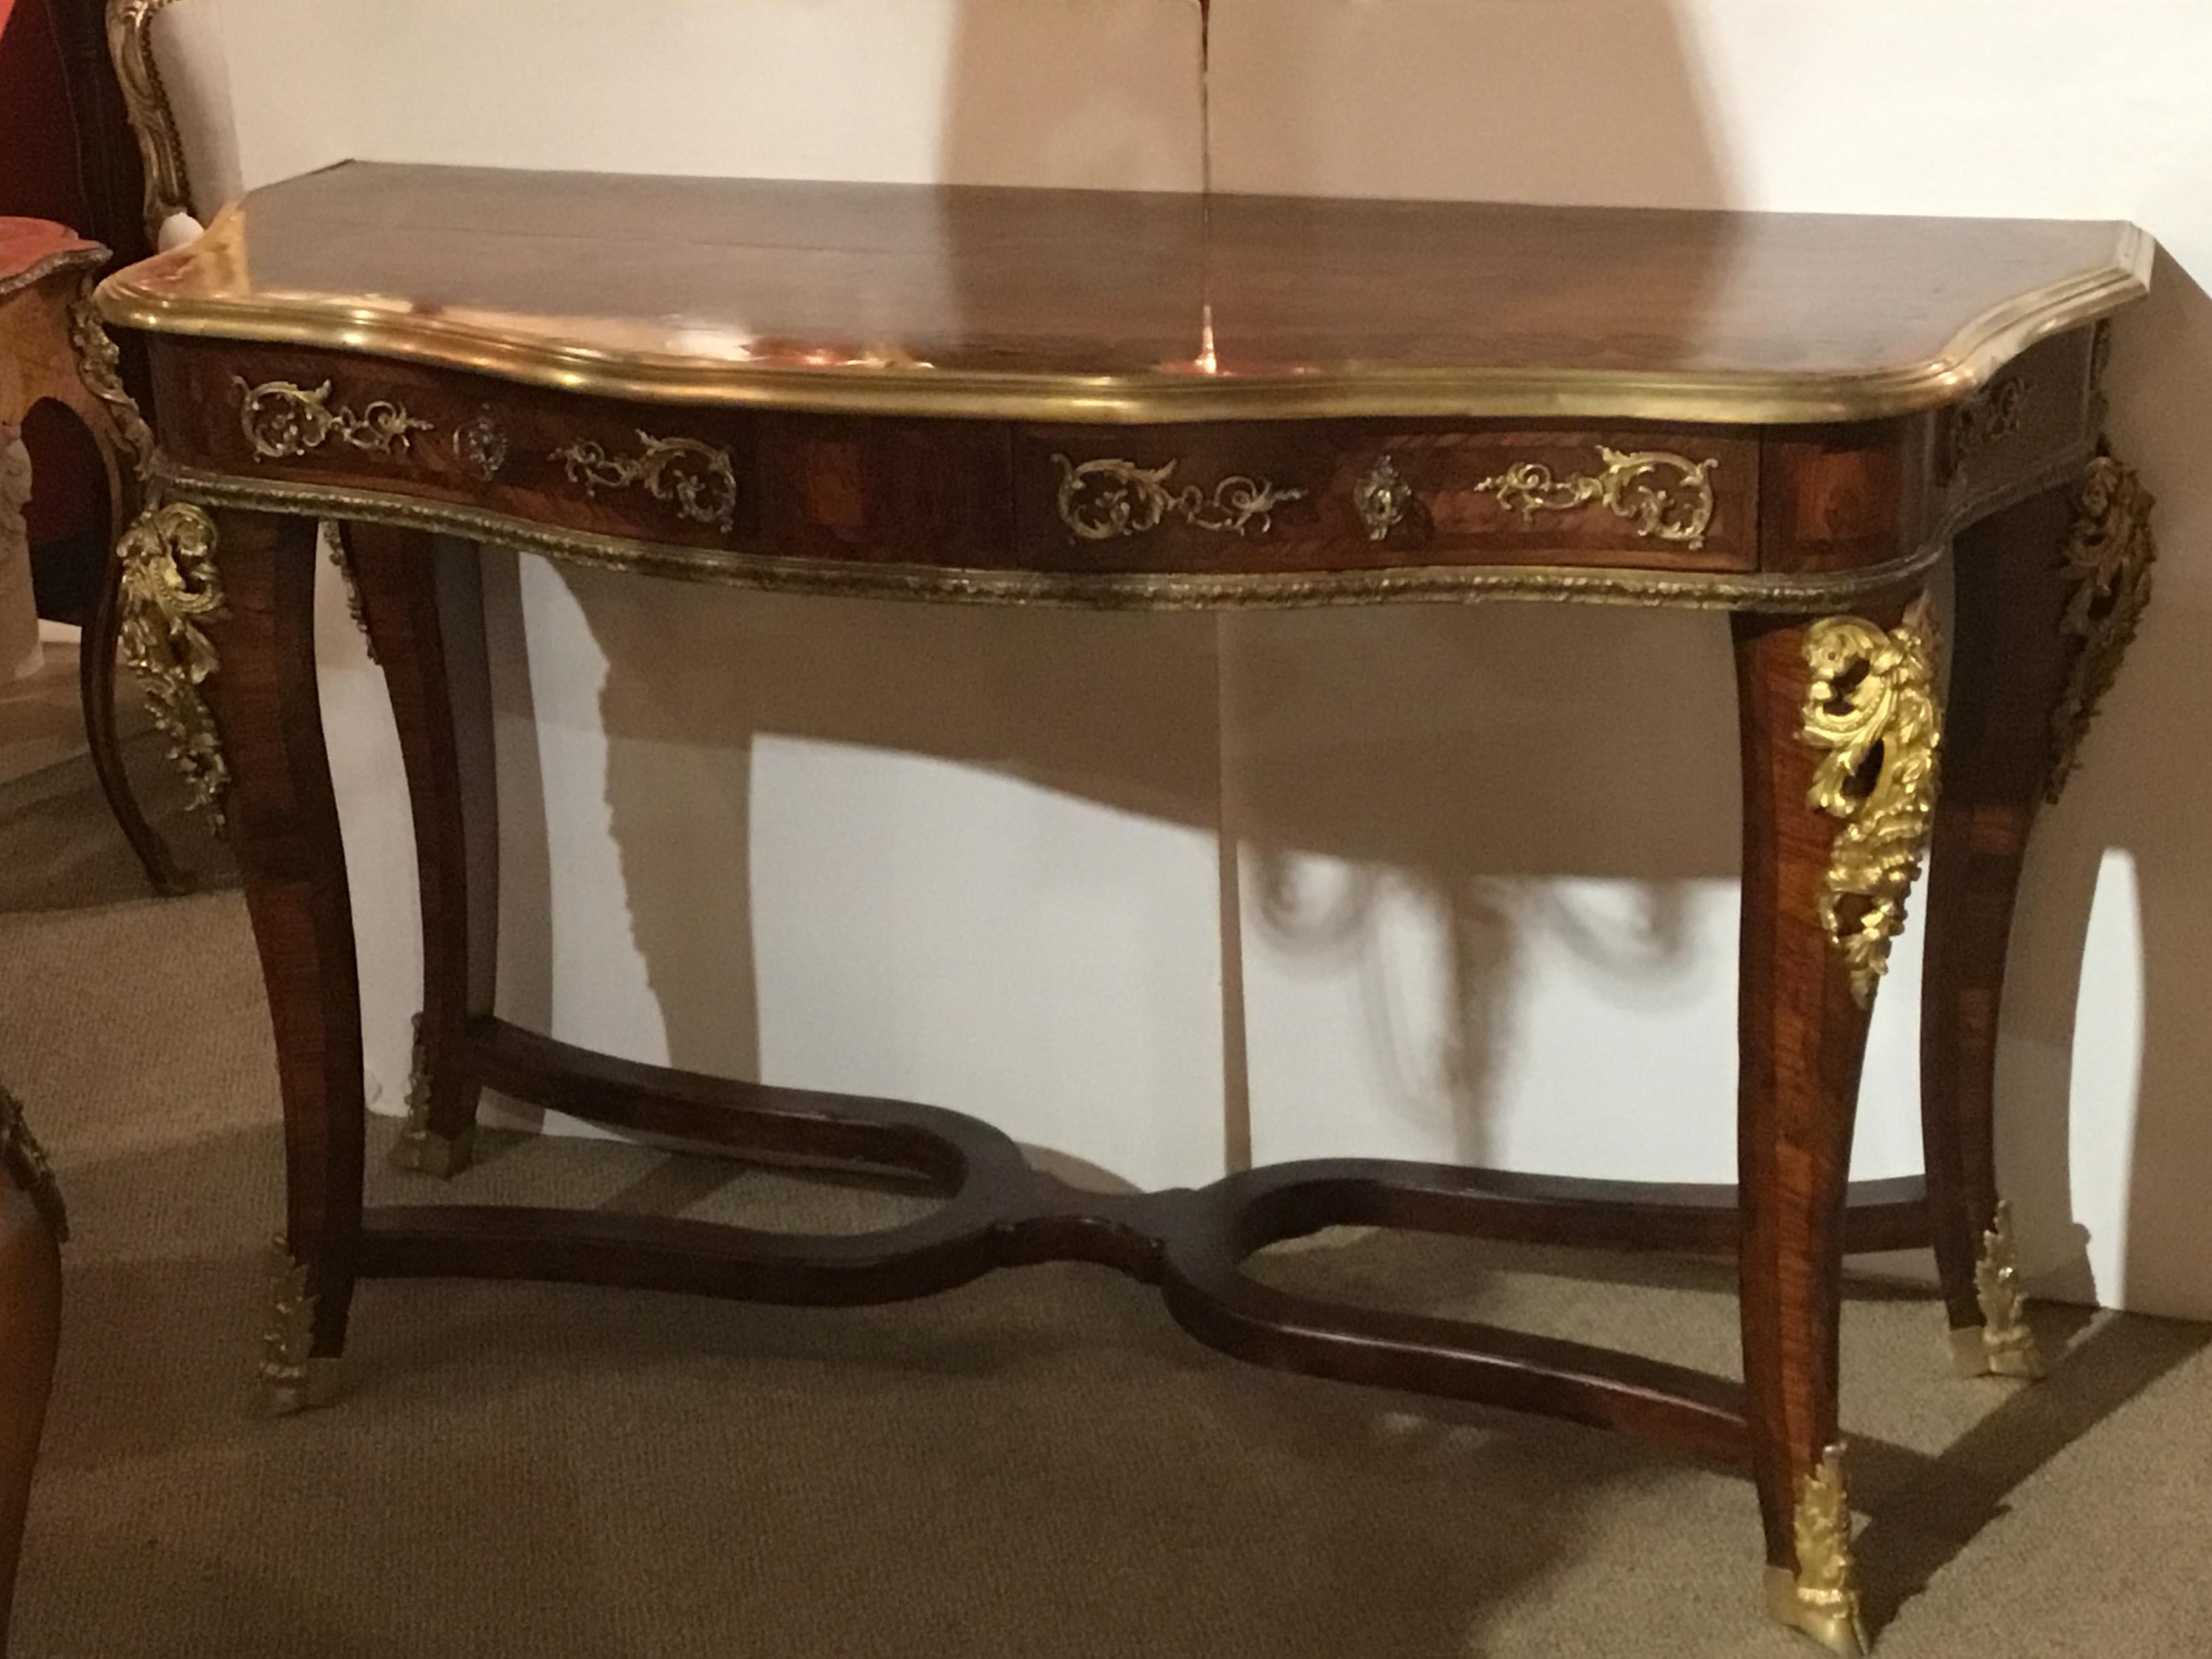 Regence Gilt Bronze Mounted Parquetry Inlaid Hardwood Console Table 18th Century For Sale 5